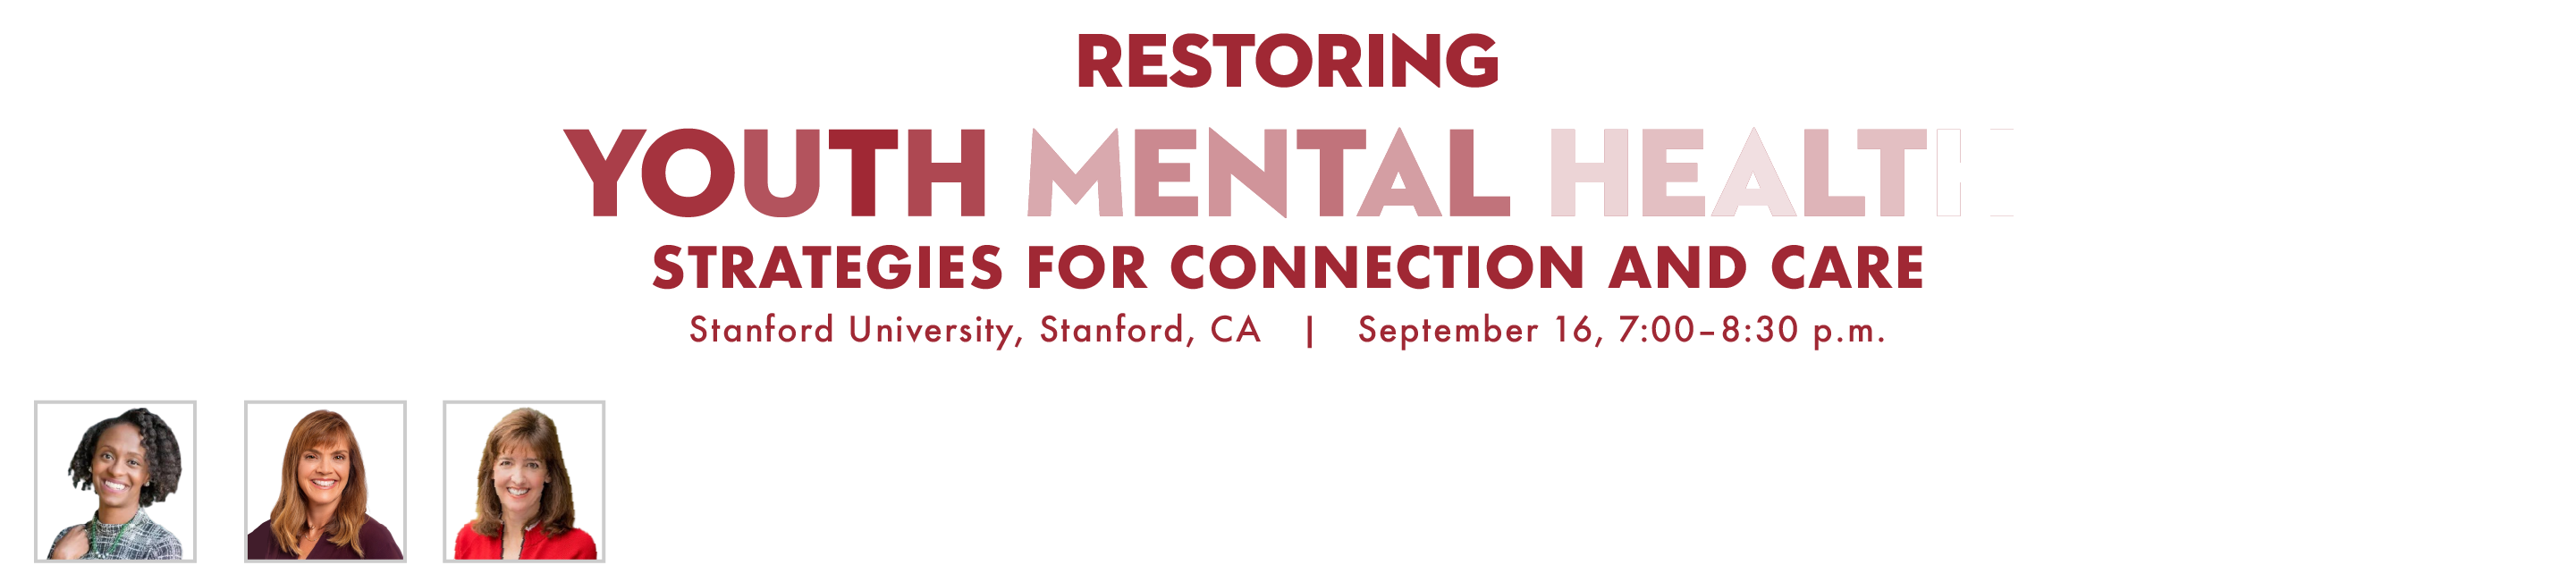 . Strategies for Connection and Care. Stanford University, Stanford, CA. September 16, 7:00 - 8:30 pm. Join us for an engaging panel discussion on youth mental health. $20 for adults; Free for students. Meag-gan O'Reilly. Lynn Lyons. Denise Pope.